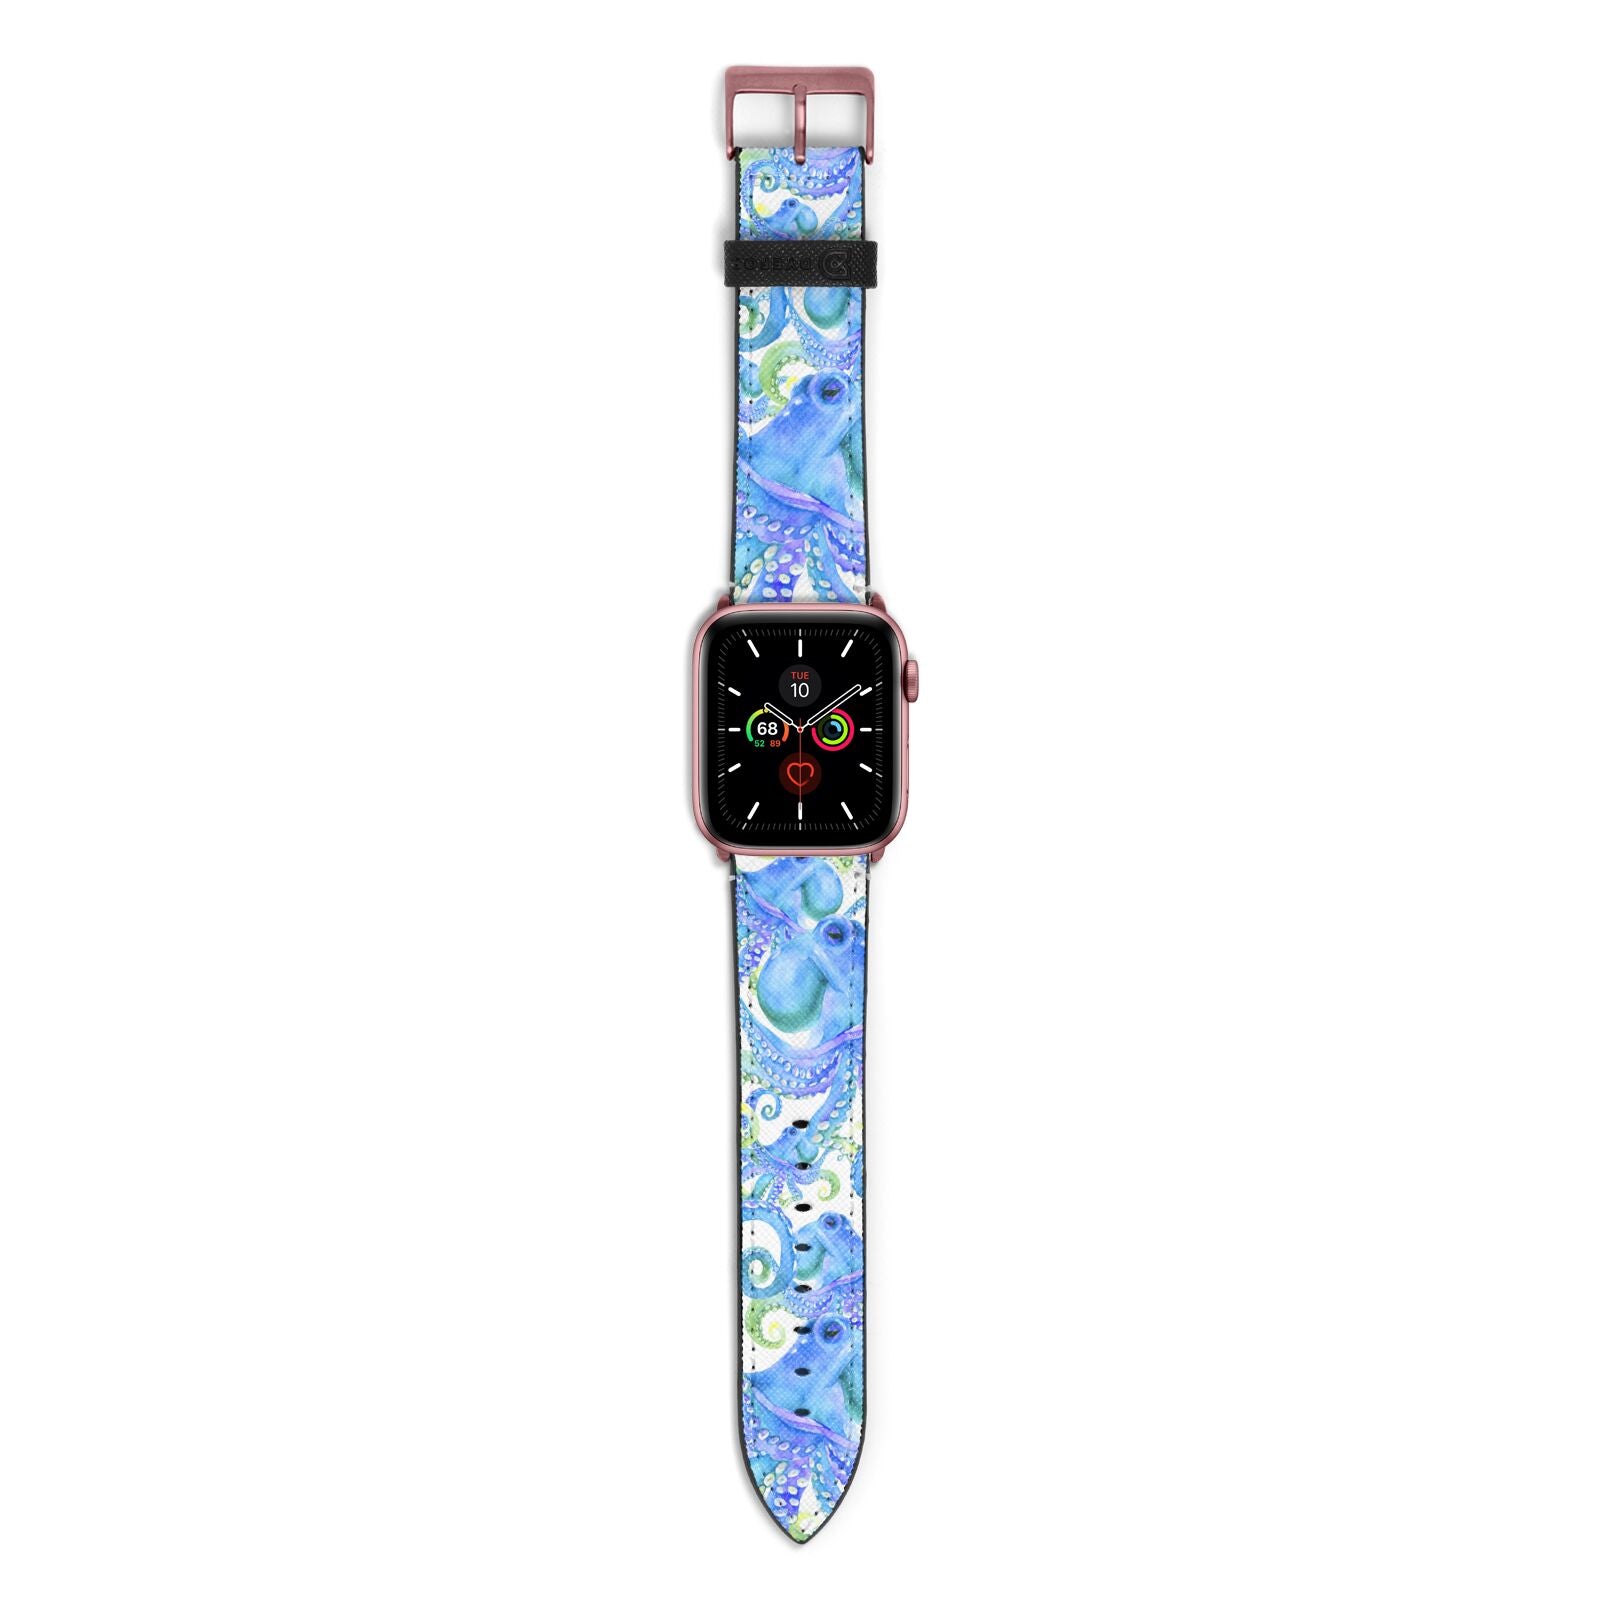 Octopus Apple Watch Strap with Rose Gold Hardware